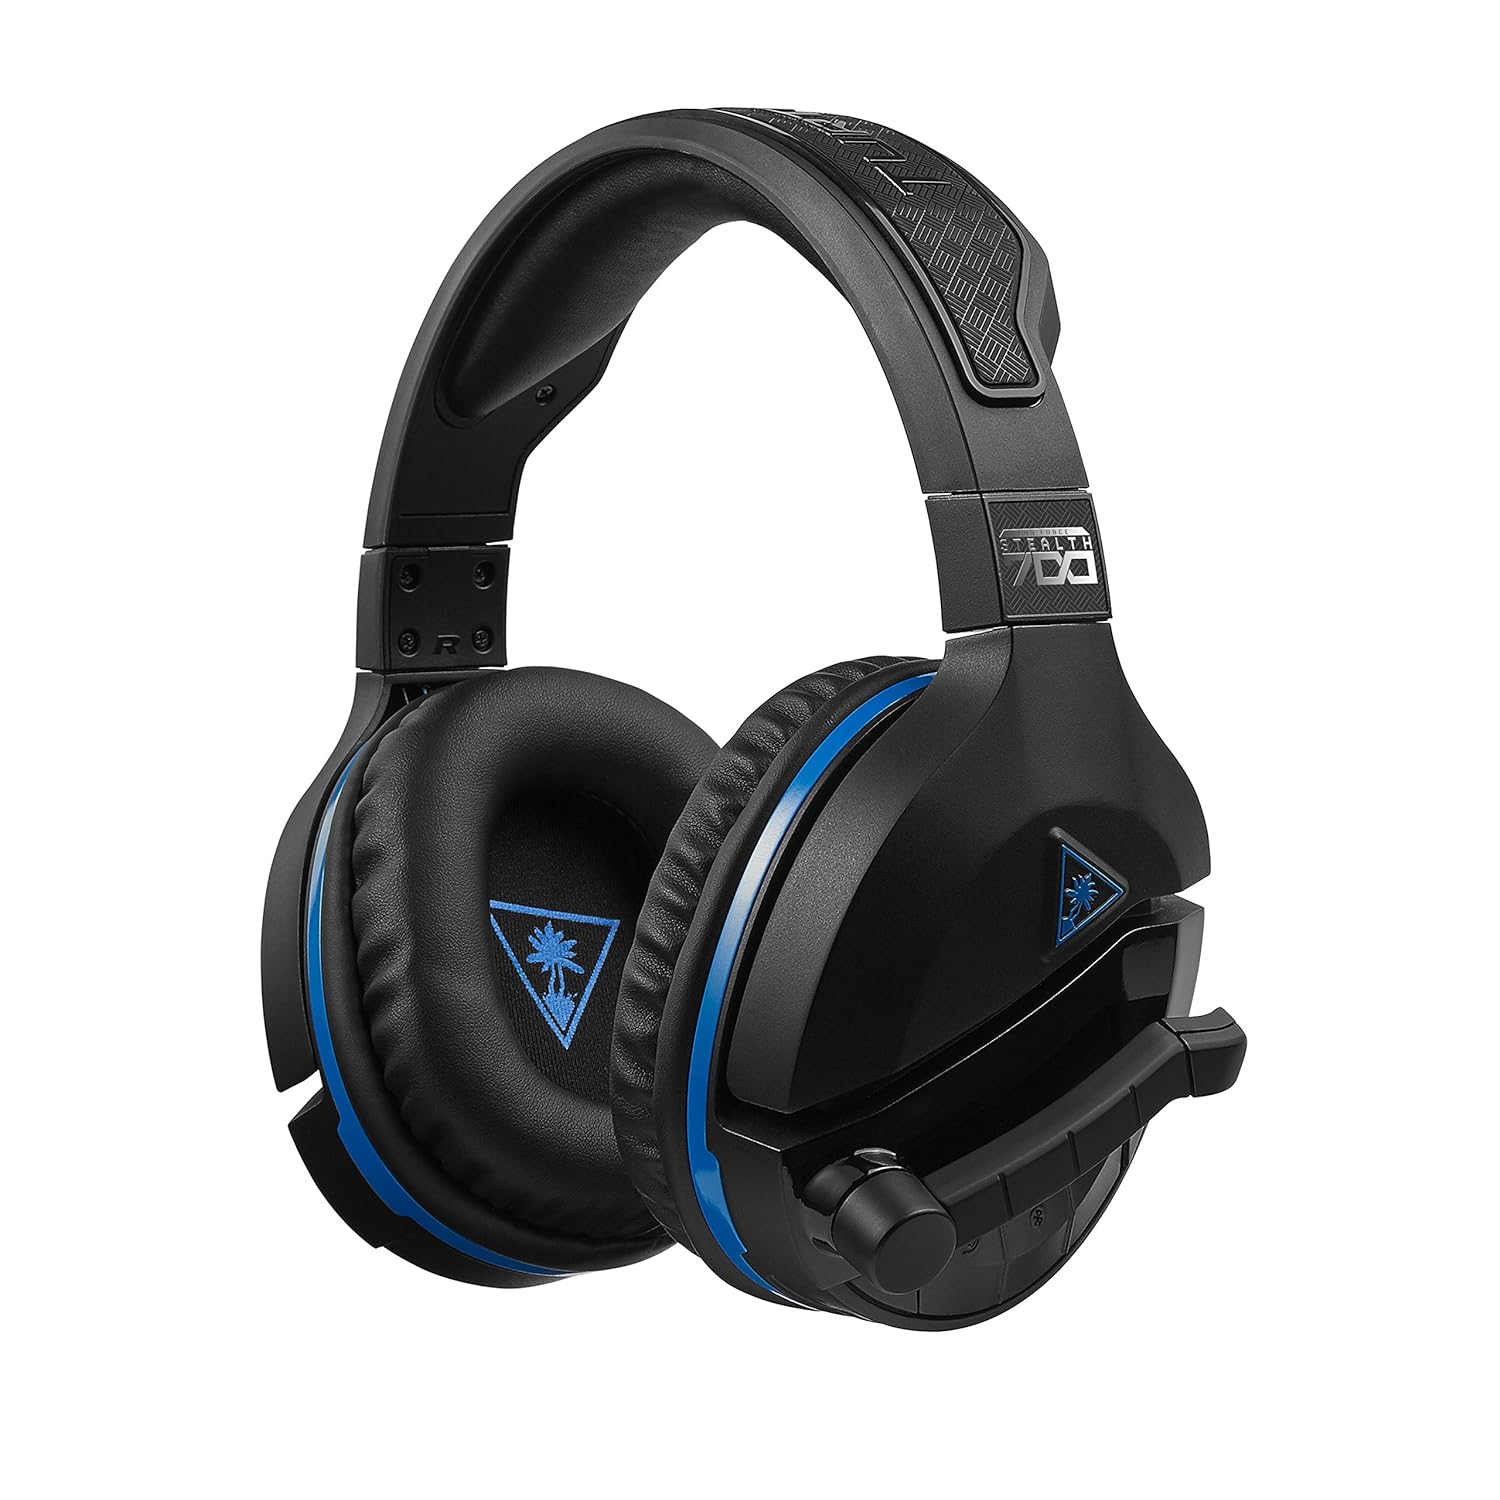 Turtle Beach Stealth 700 Premium Wireless Surround Sound Gaming Headset for PlayStation 4 Pro and PlayStation 4